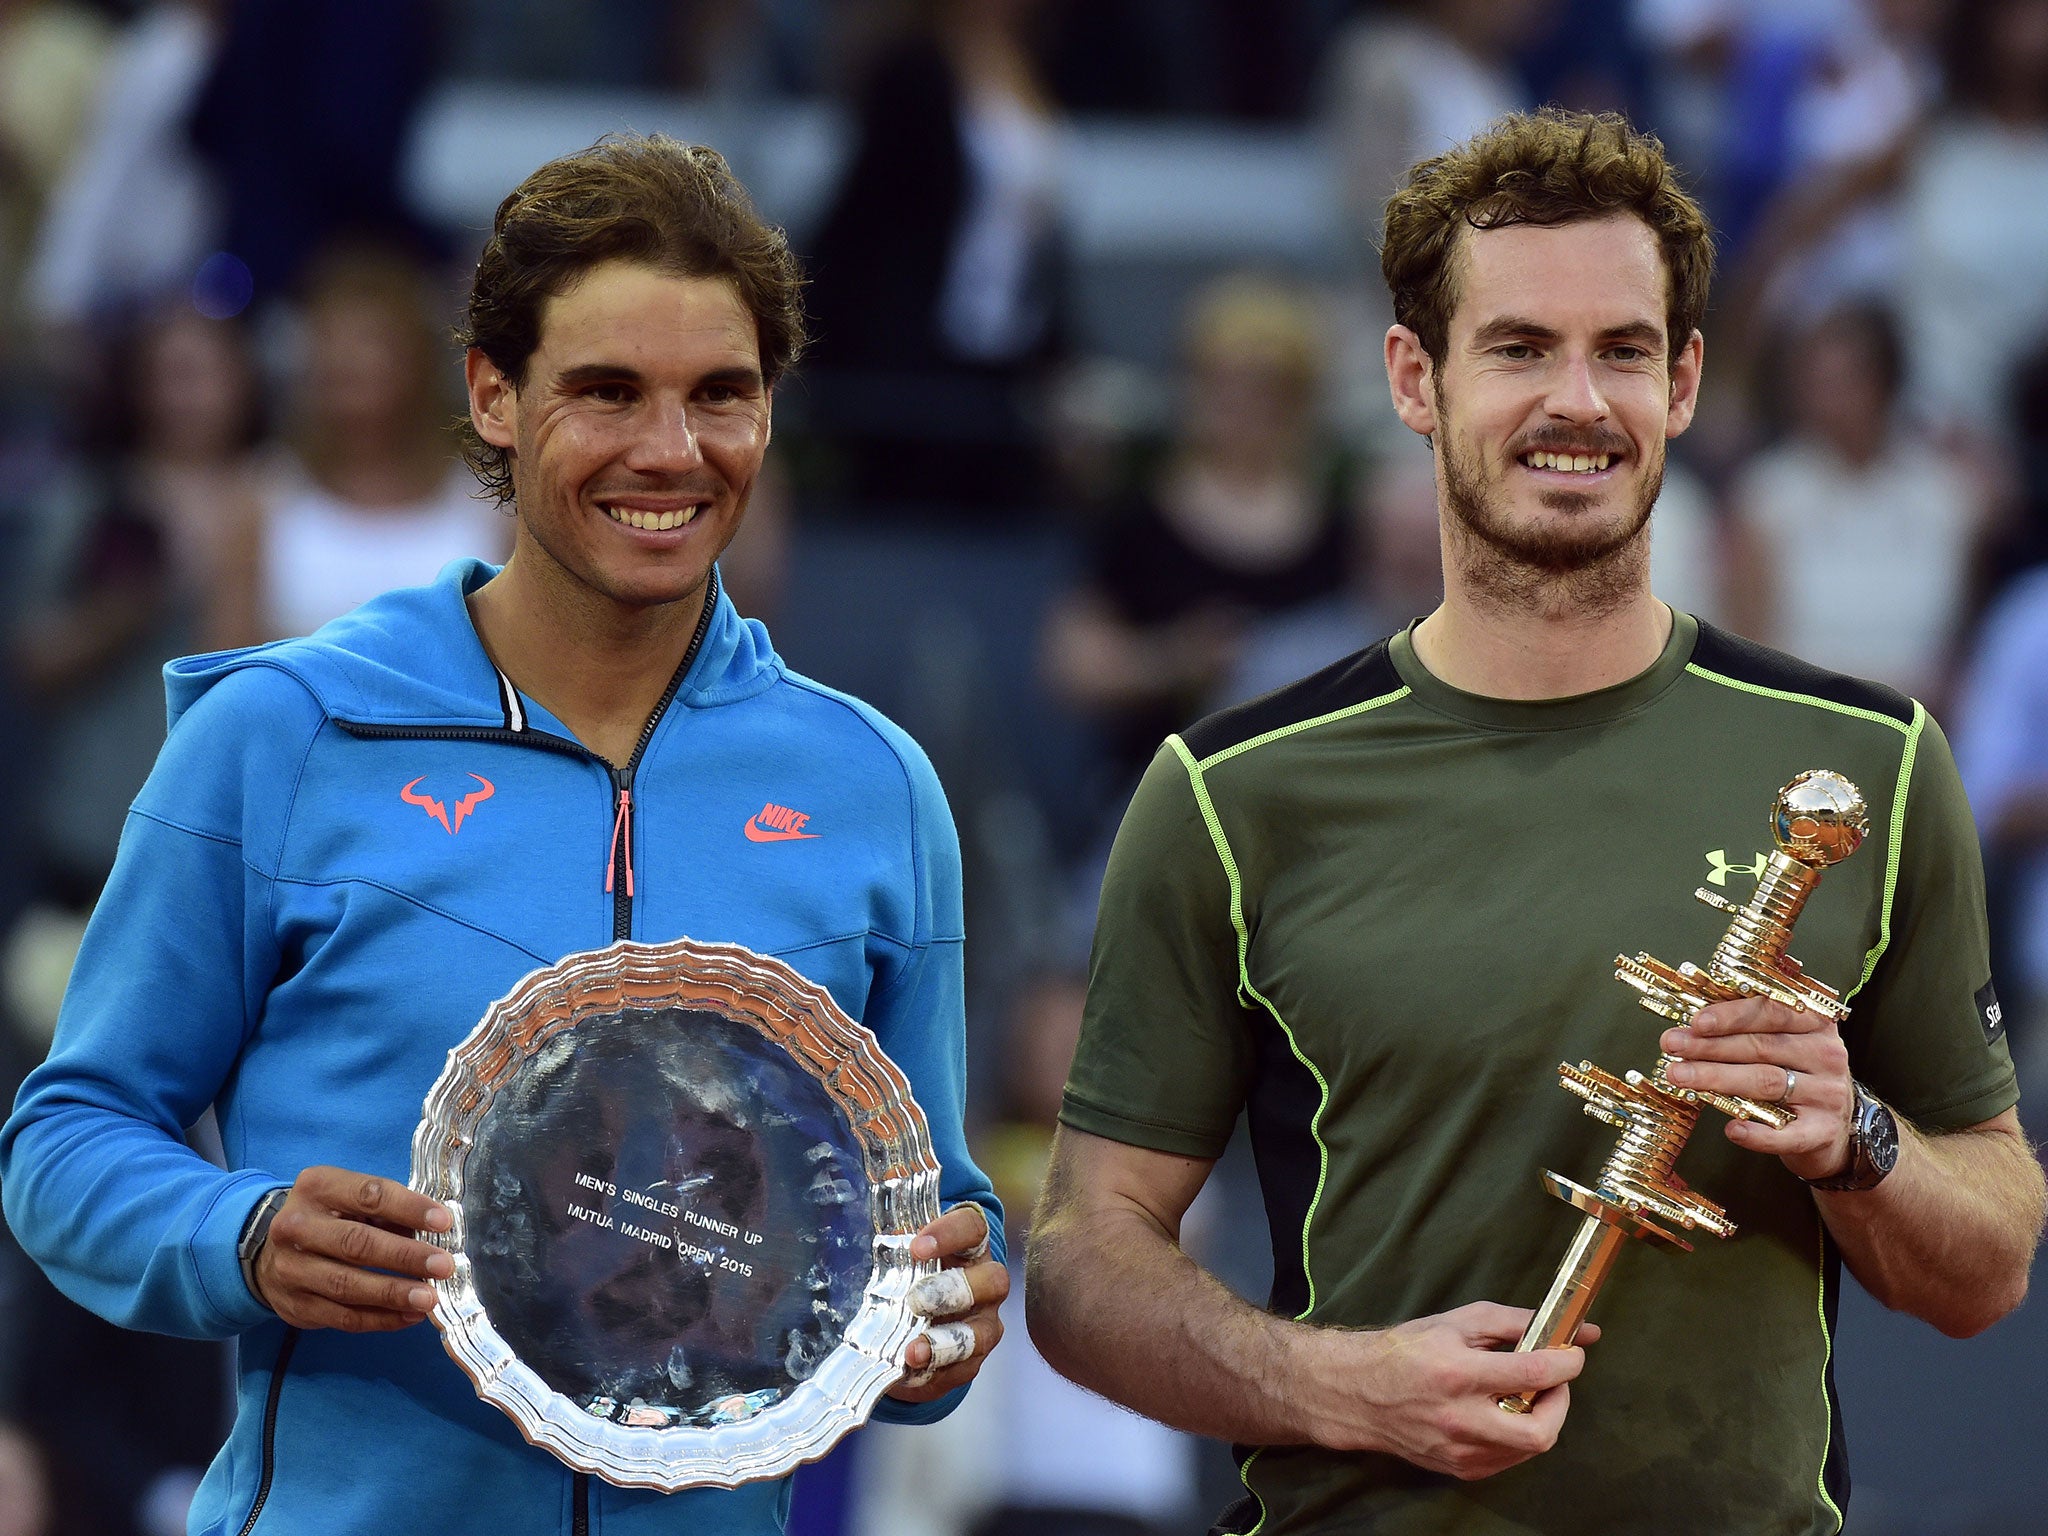 Andy Murray beat Rafael Nadal in straight sets to win the Madrid Open